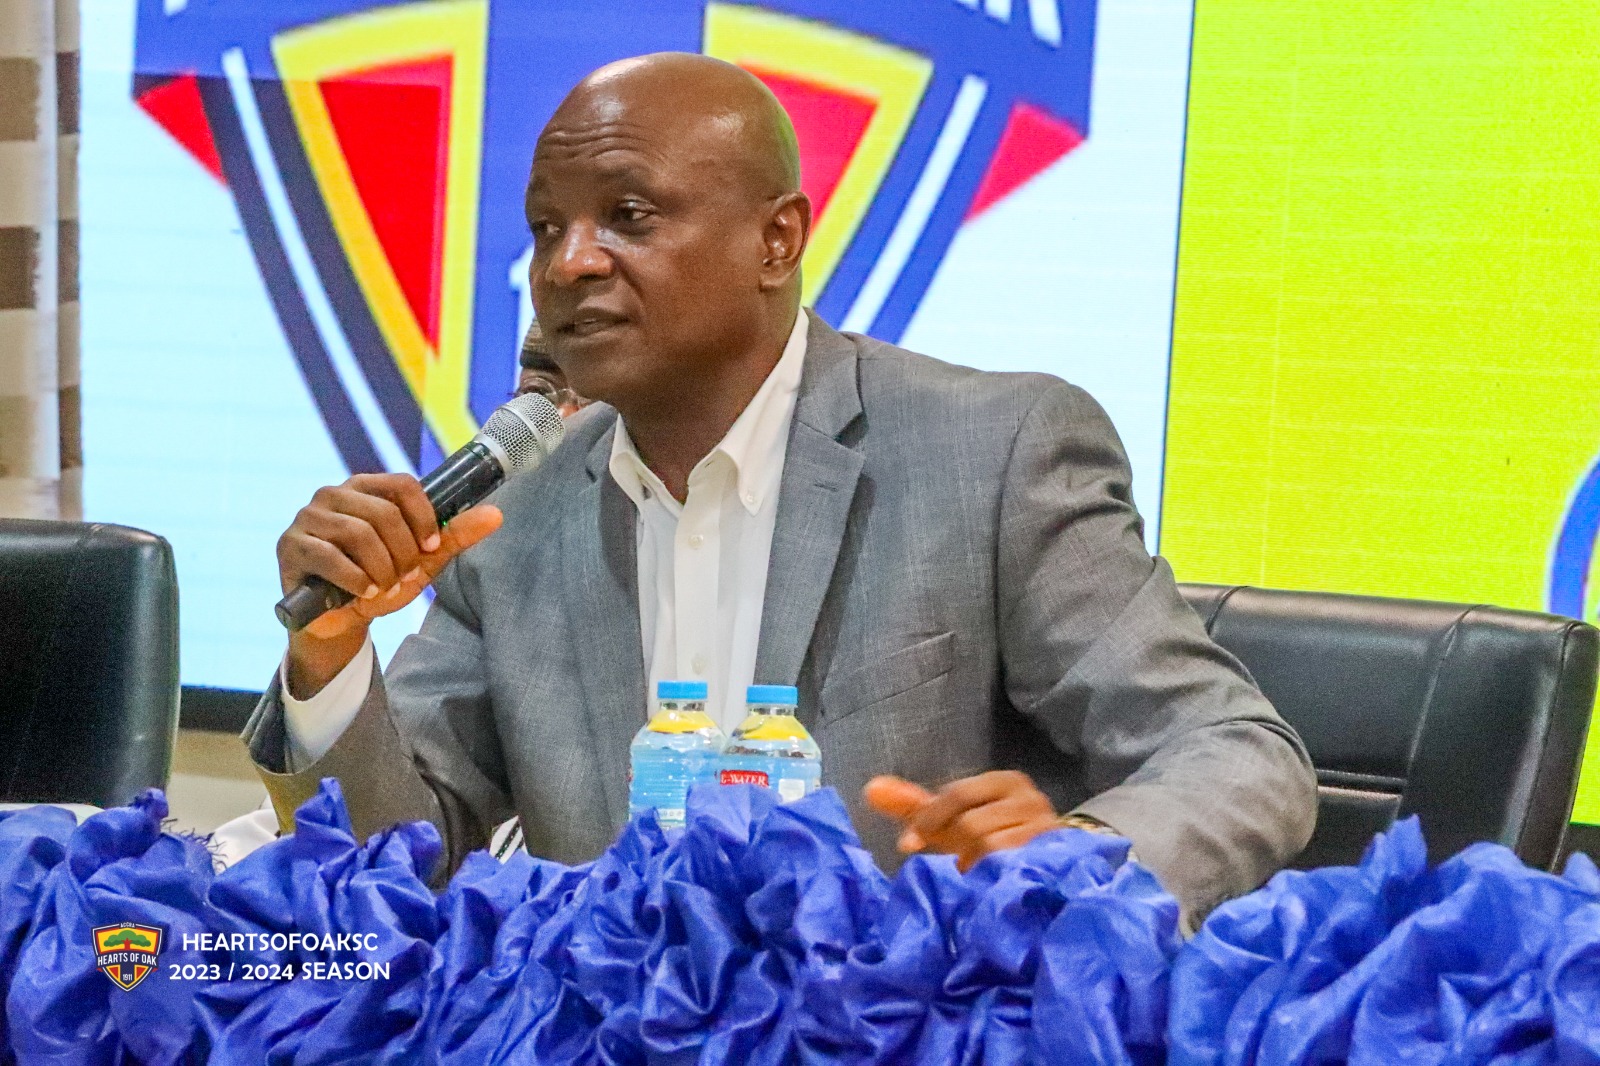 Togbe Afede's decision to sack experienced administrators reason behind Hearts of Oak's struggle - Harry Zakour